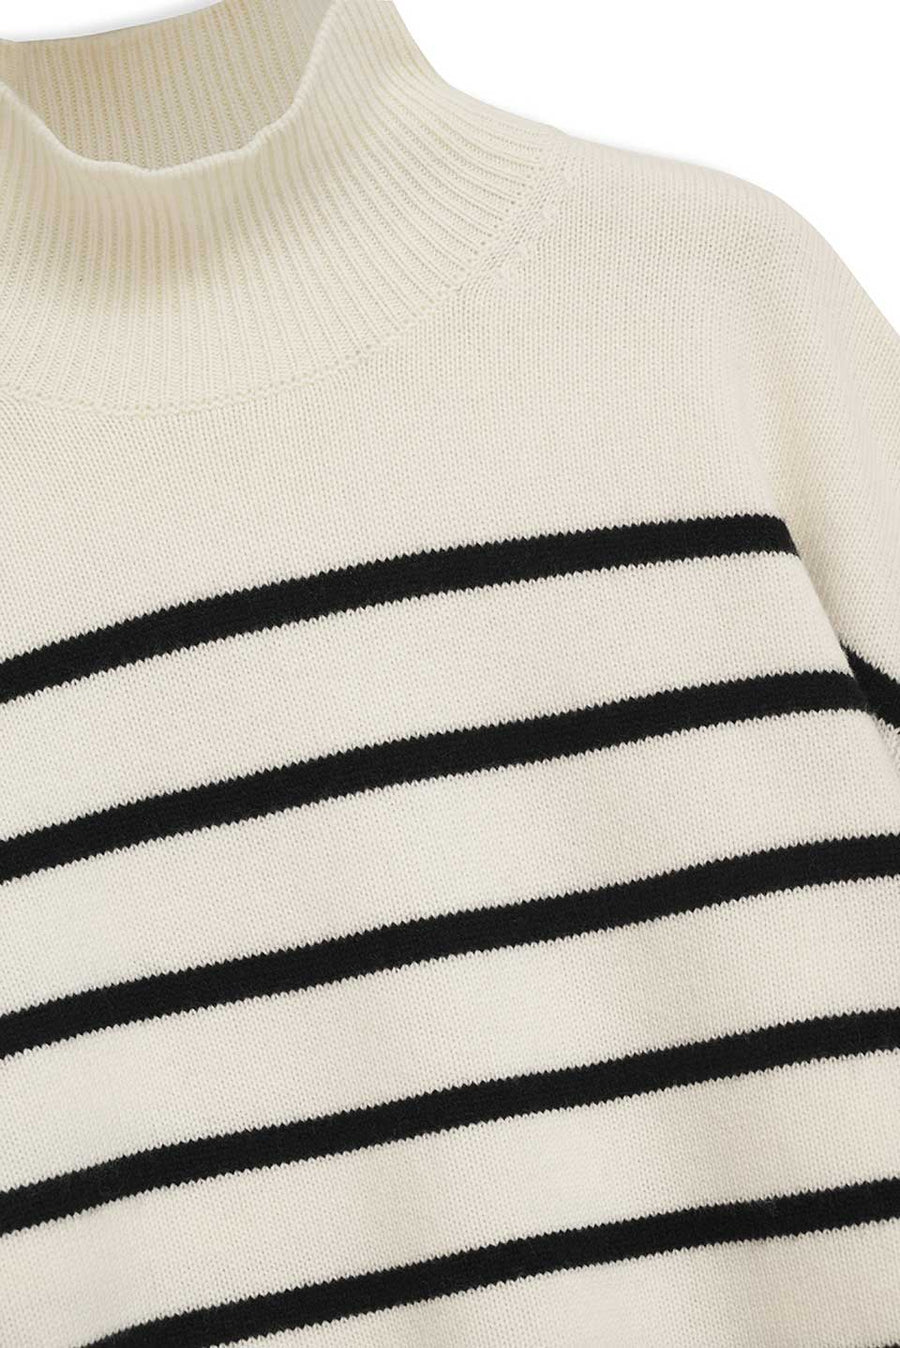 anine bing courtney sweater white front